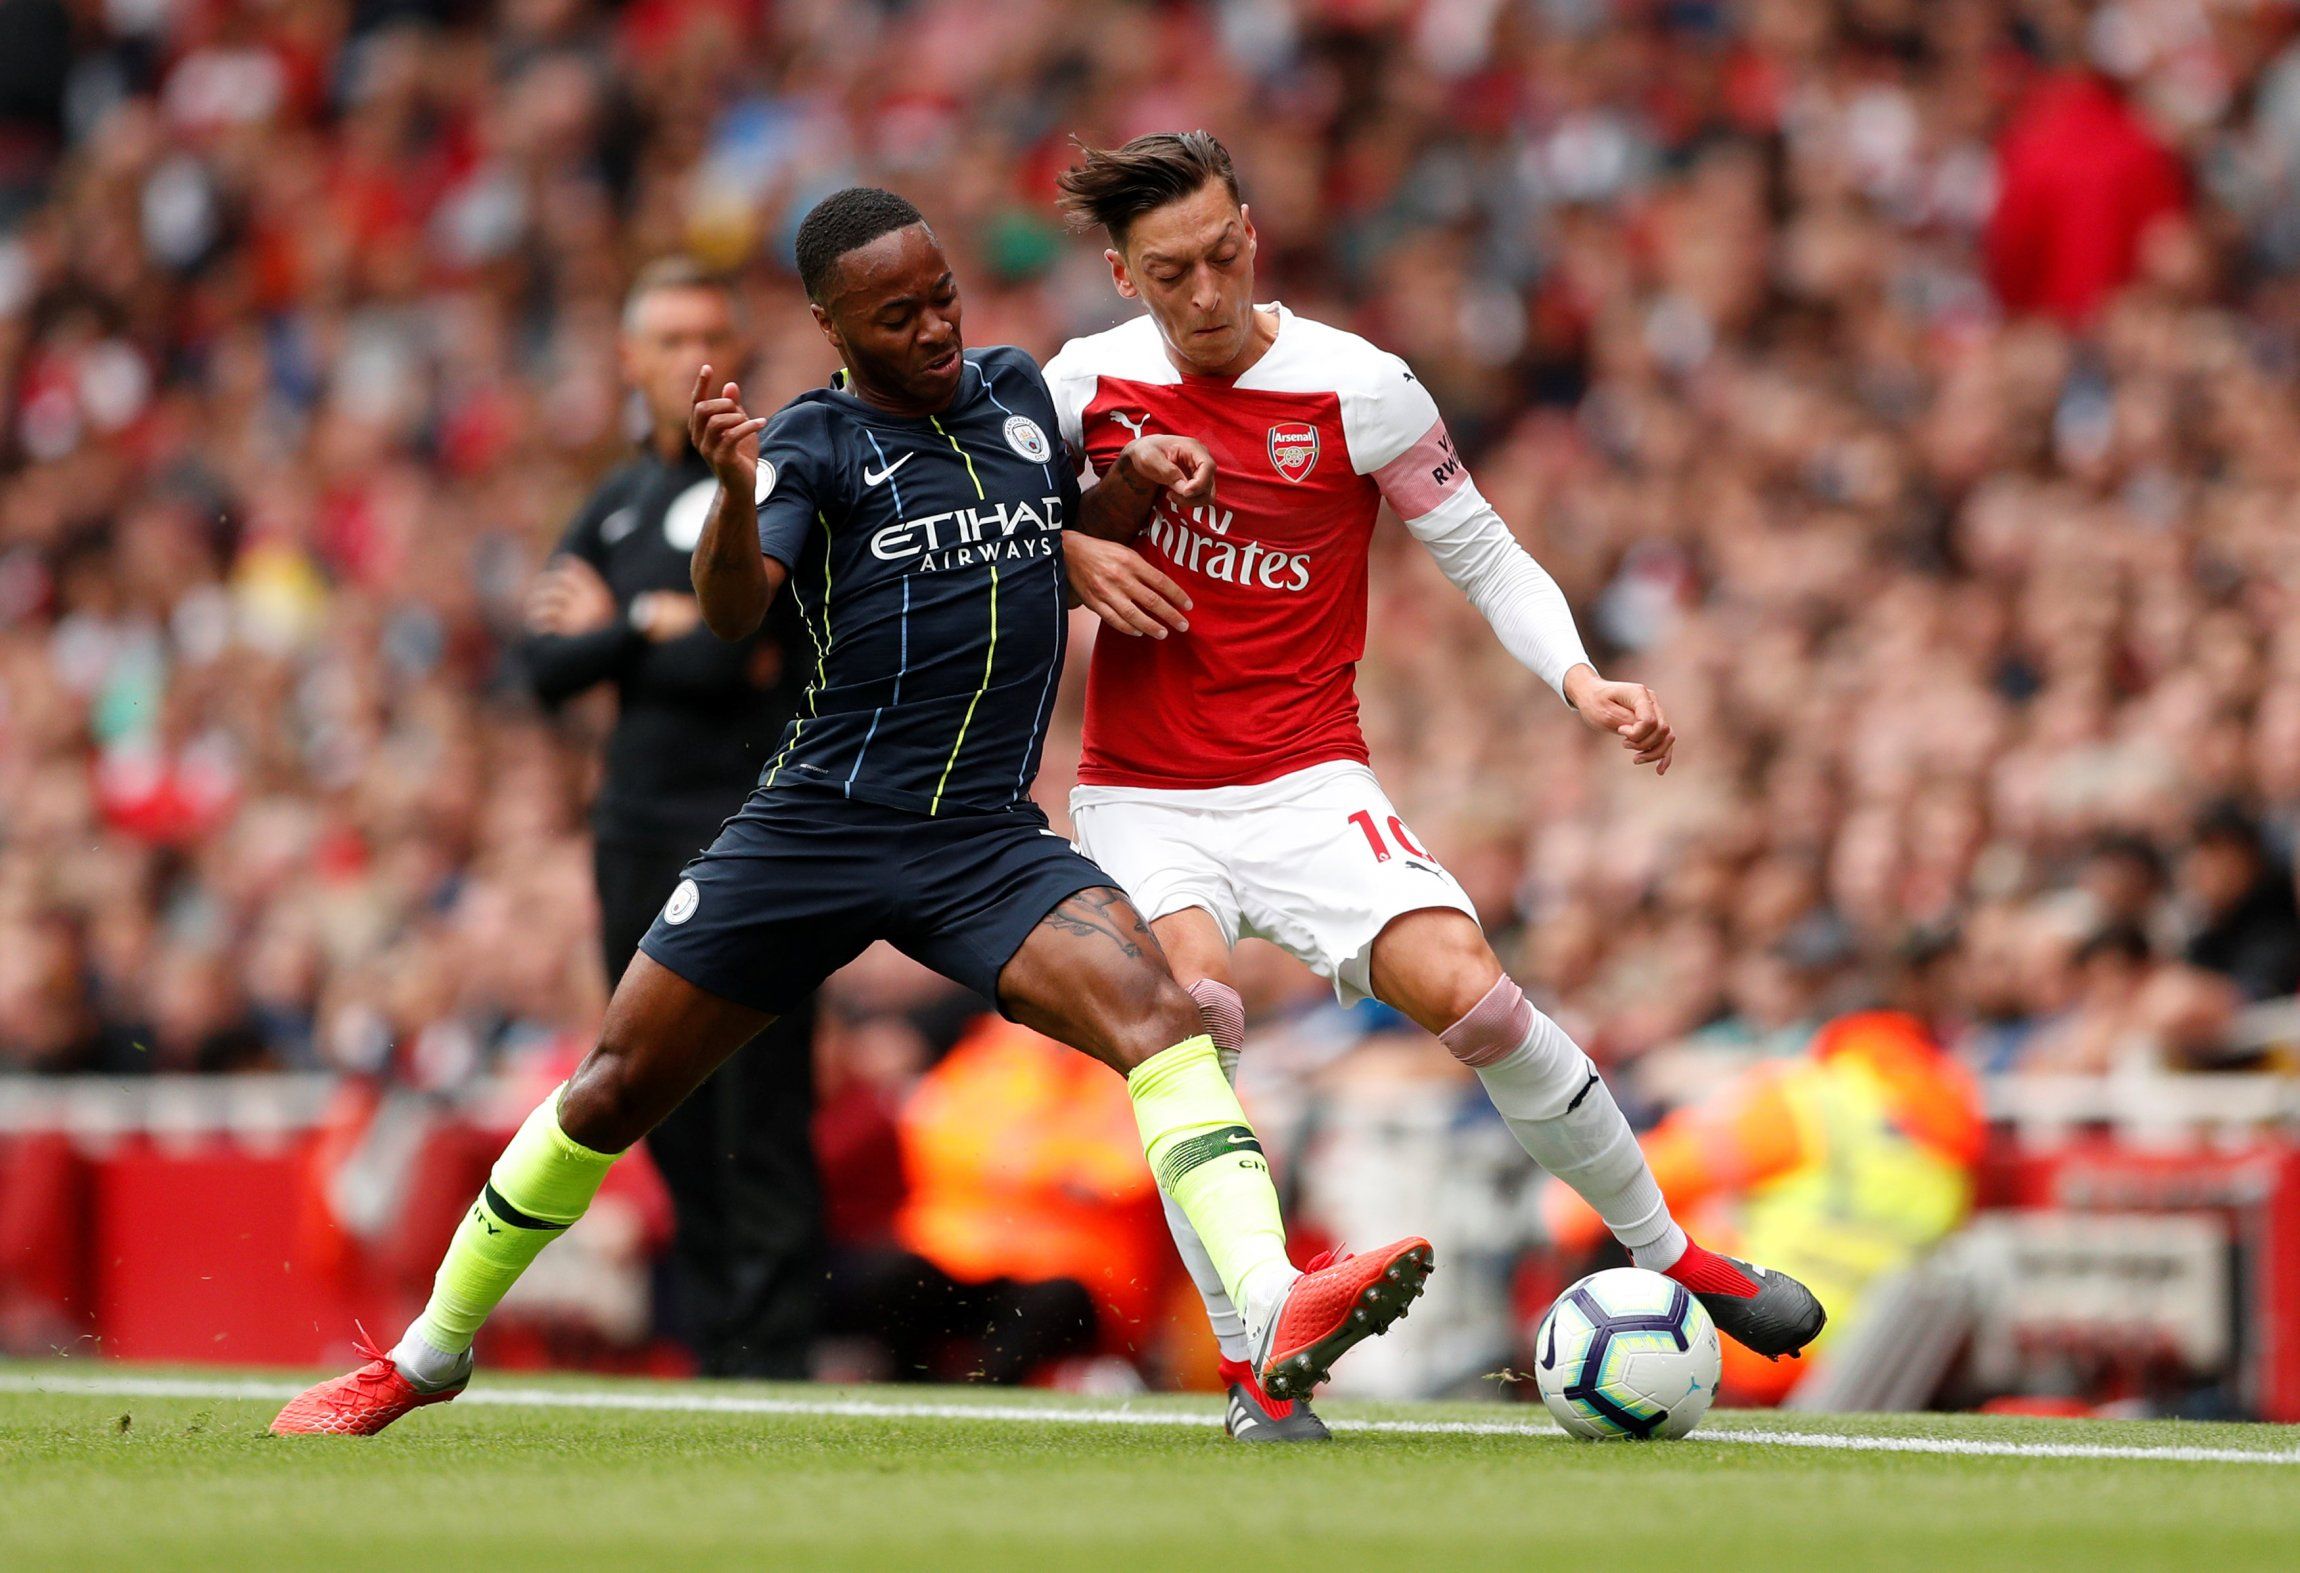 Raheem Sterling challenges Mesut Ozil in Manchester City's clash against Arsenal